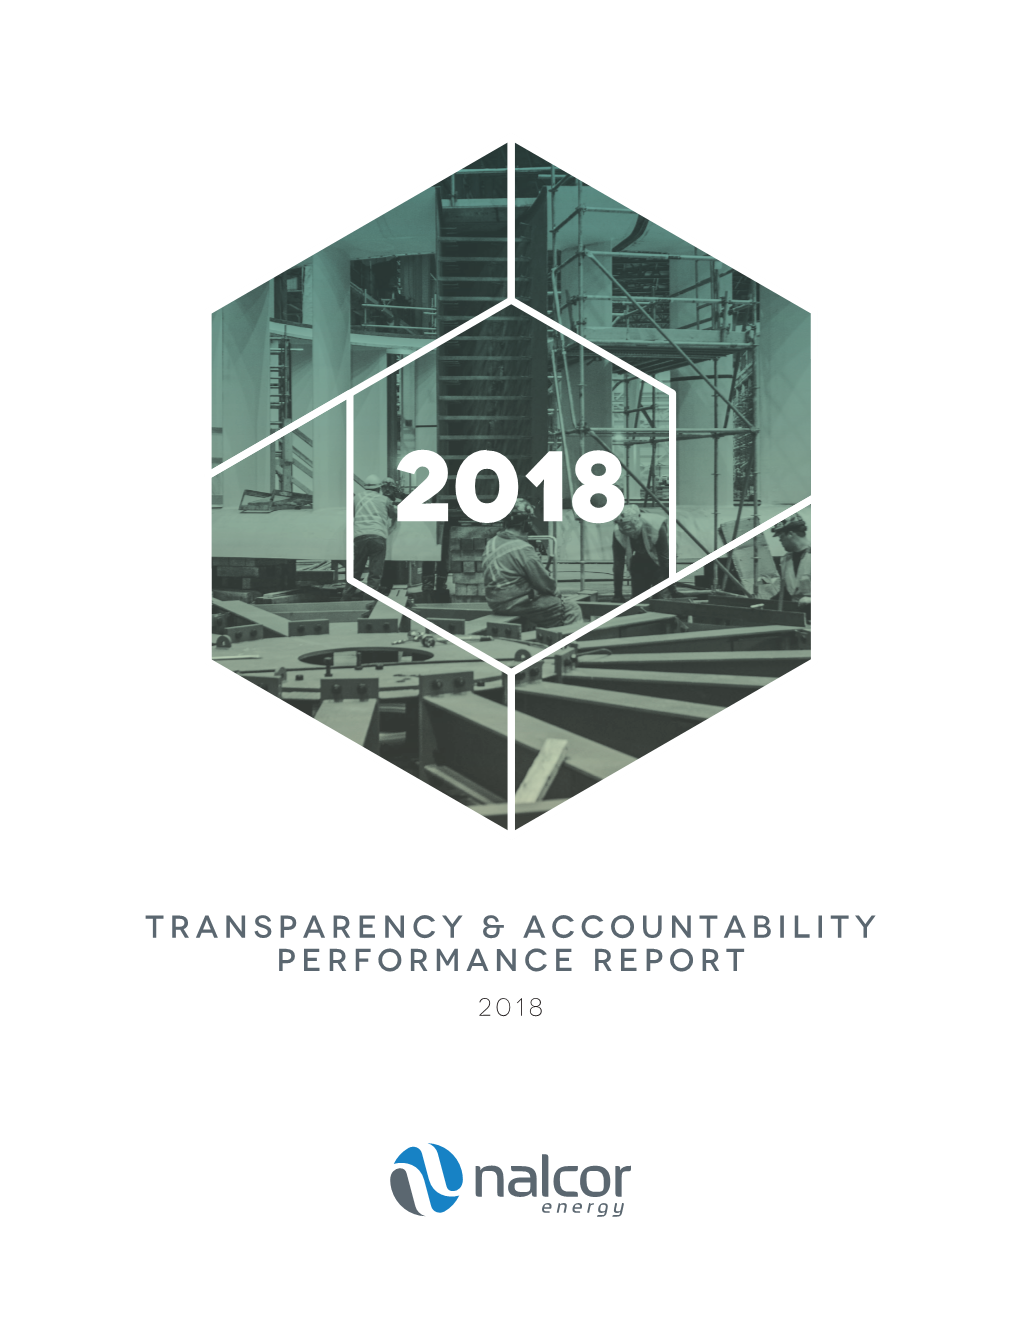 2018 Annual Performance Report Transparency and Accountability